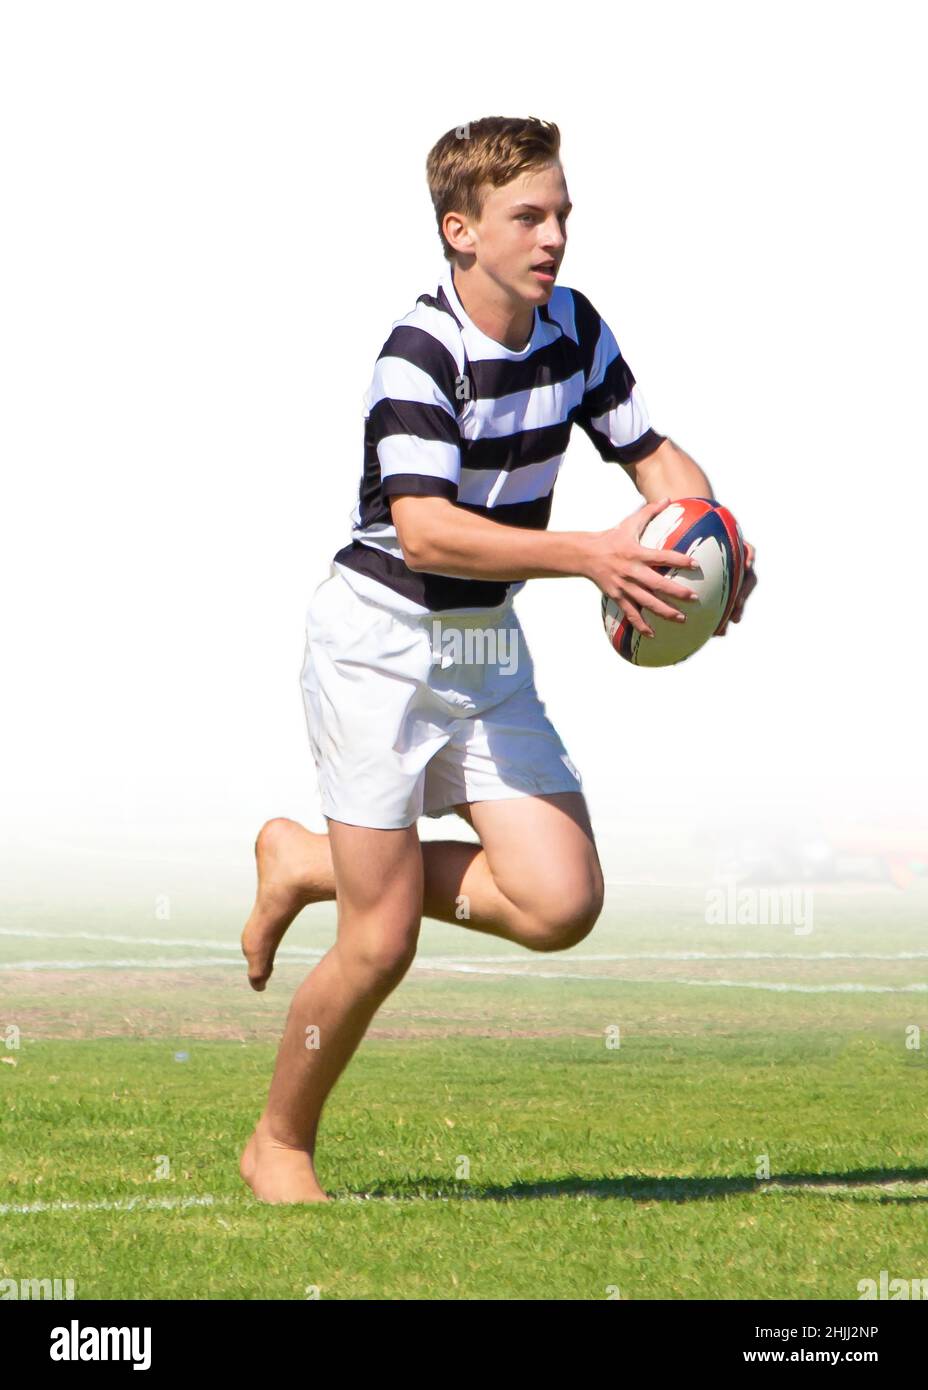 A teenage boy carrying the rugby ball in a match for a school rugby team. Stock Photo